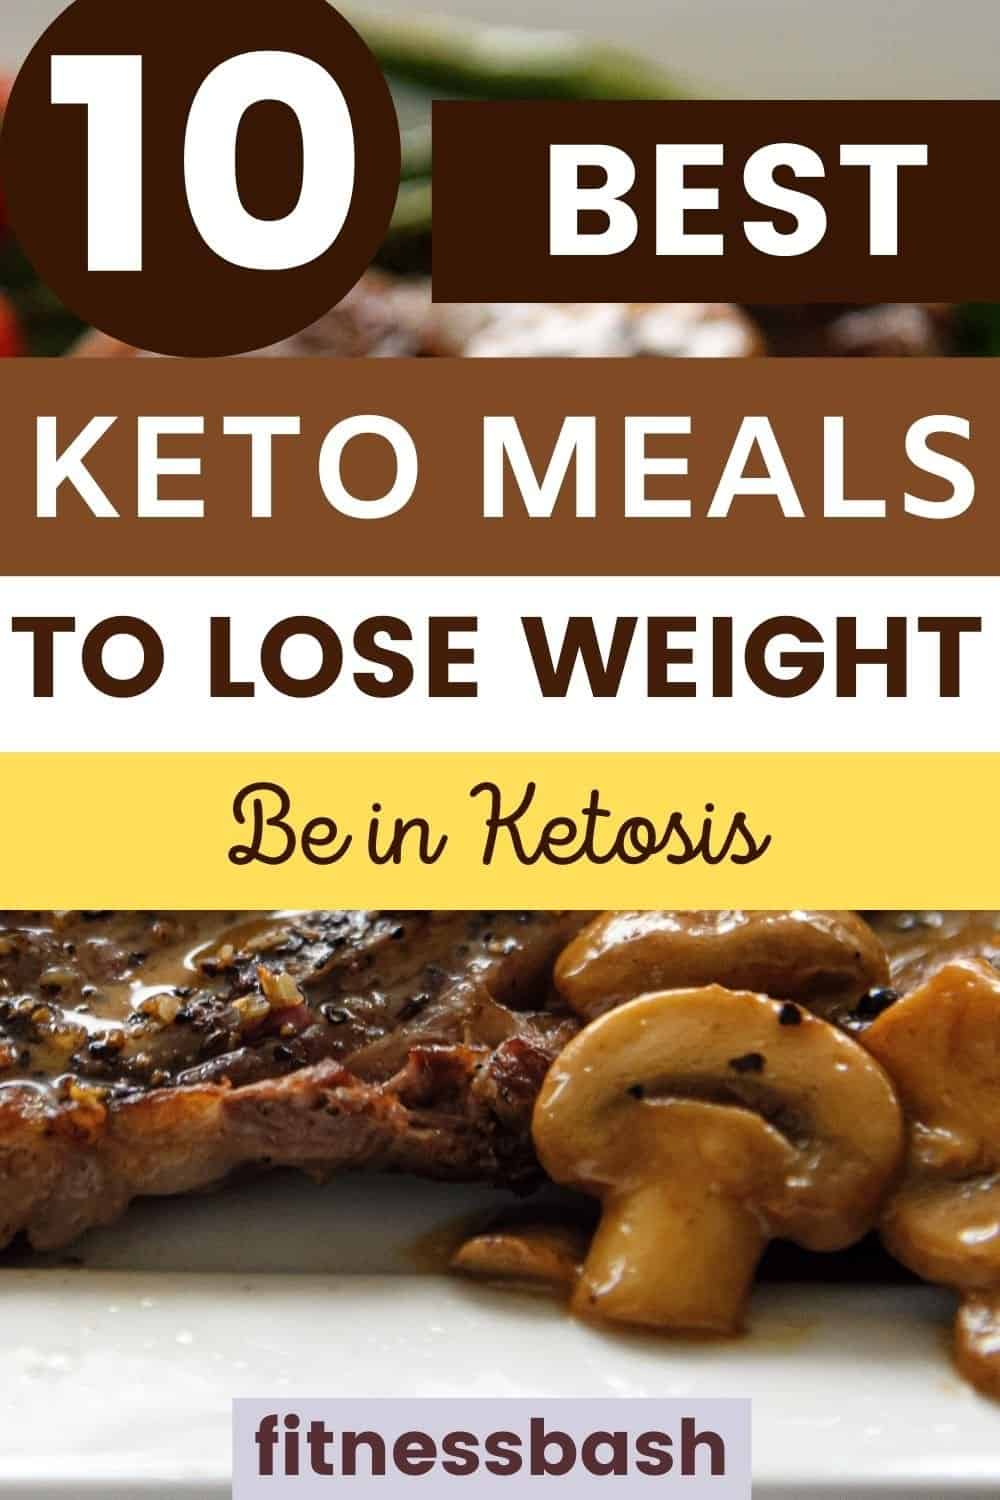 keto meals to lose weight